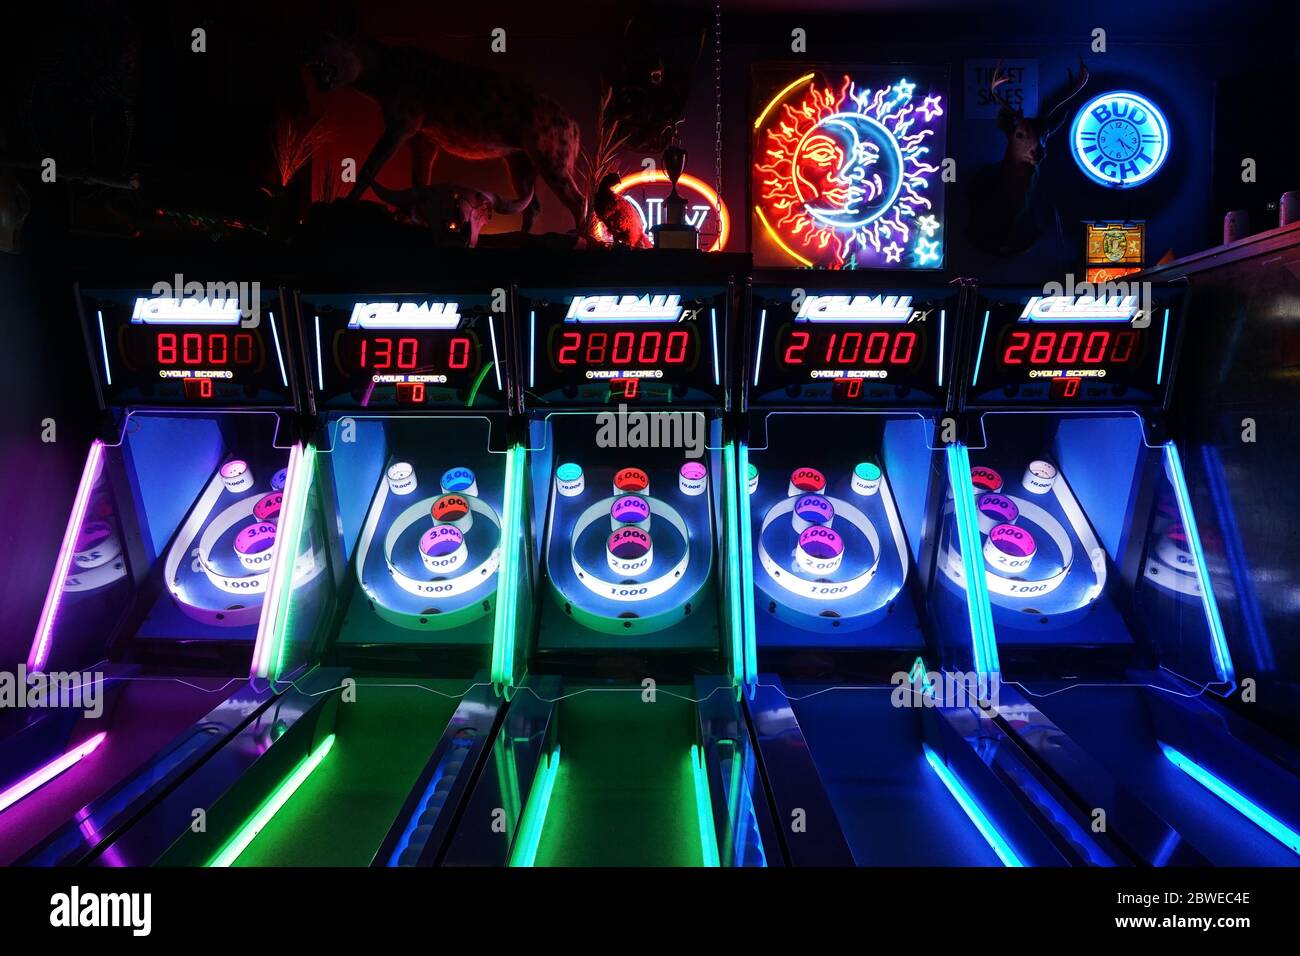 Interior design and decoration of local night club and alcohol lounge  decorated with arcade station and video games- Missouri, United States  Stock Photo - Alamy